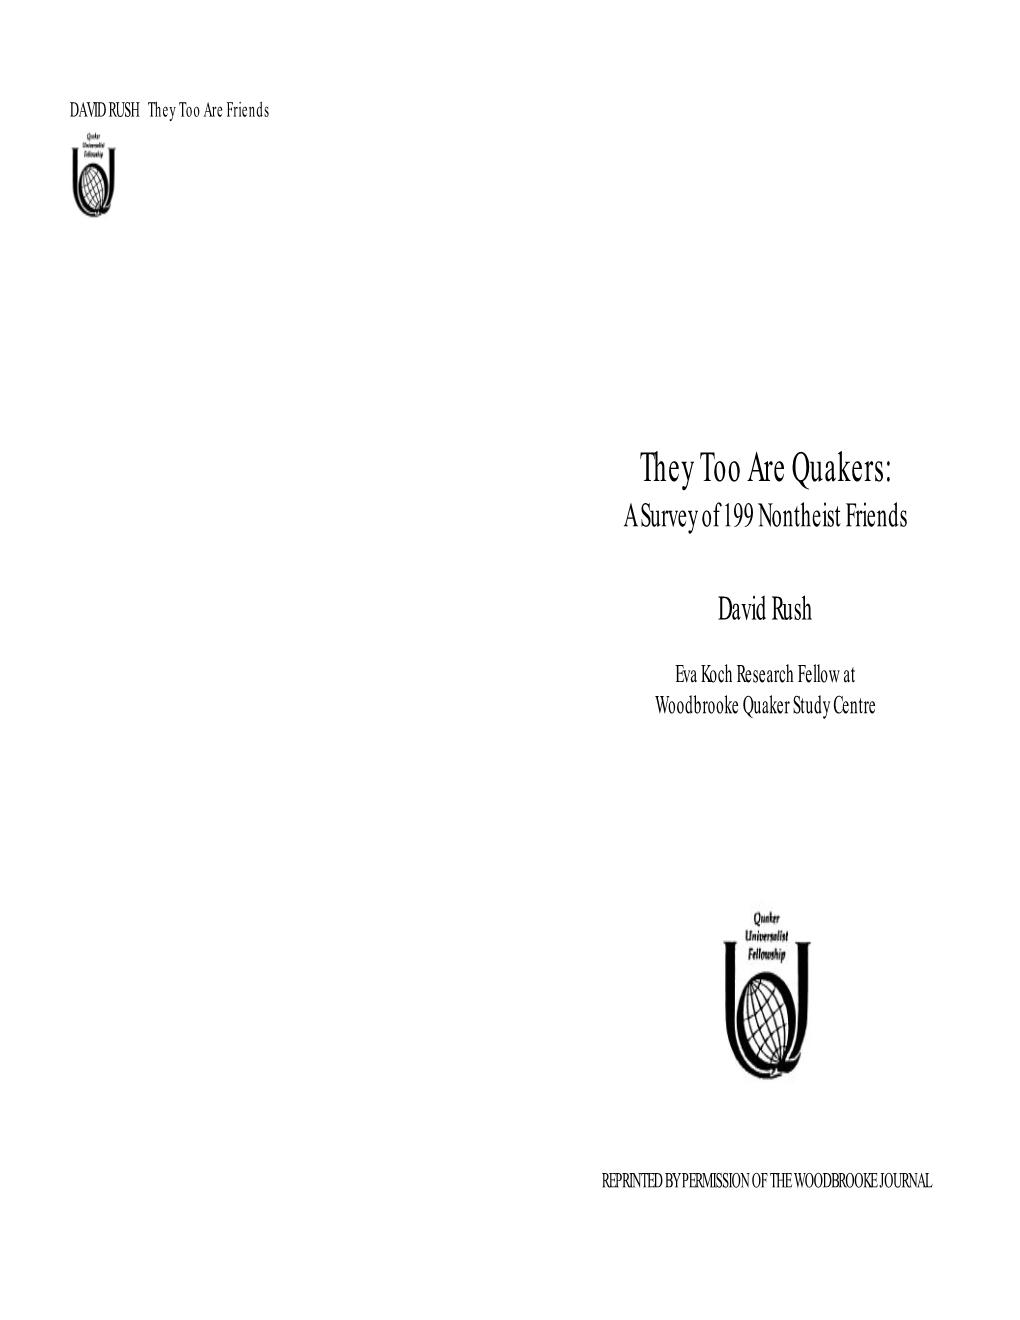 They Too Are Quakers: a Survey of 199 Nontheist Friends